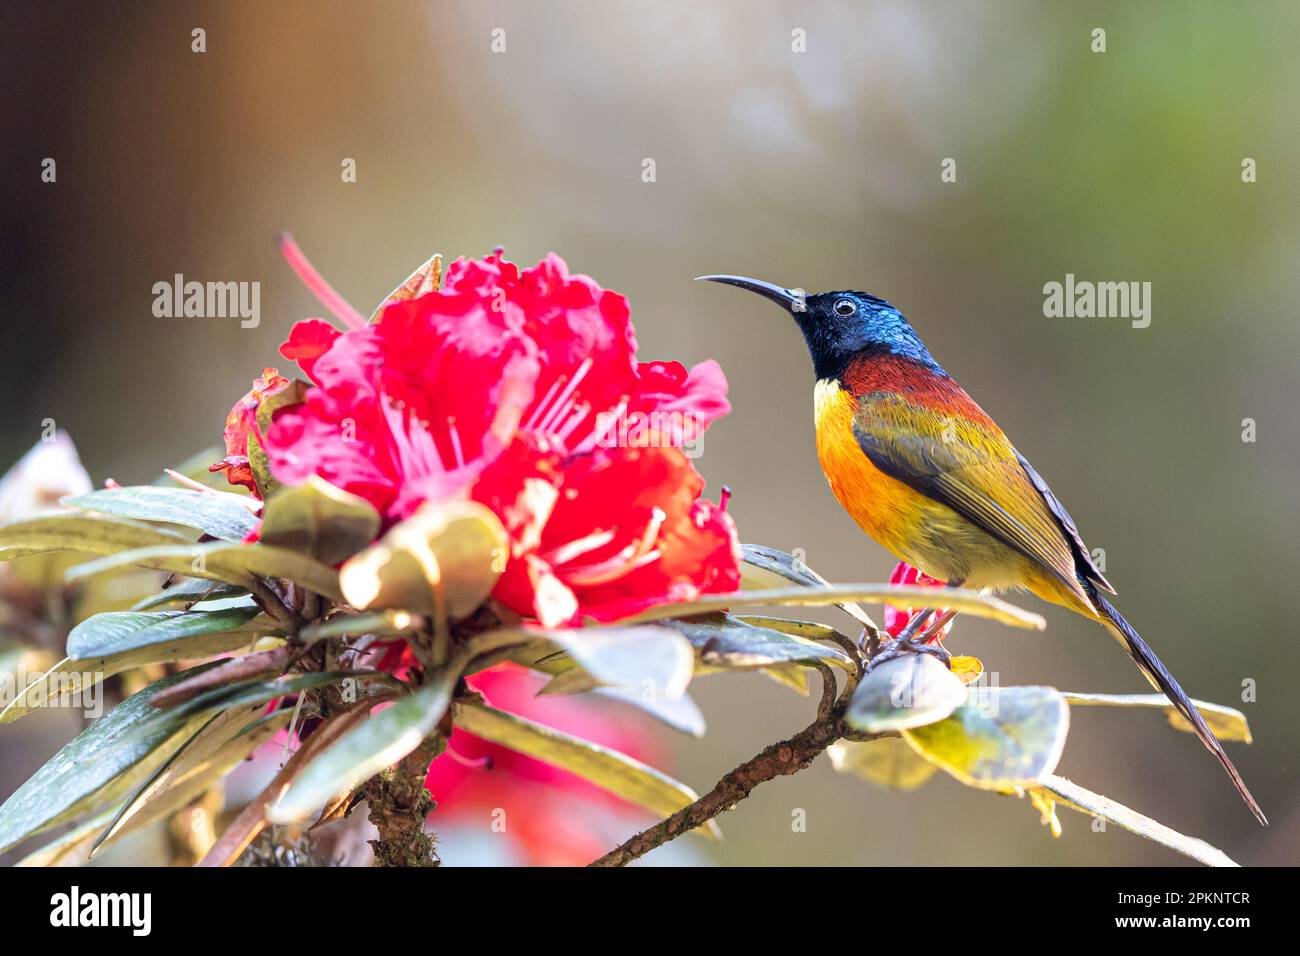 Close-up of a Green-tailed Sunbird feeding on a red Rhododendron flower is in bloom, a subspecies native to the Doi Inthanon, Thailand. Stock Photo